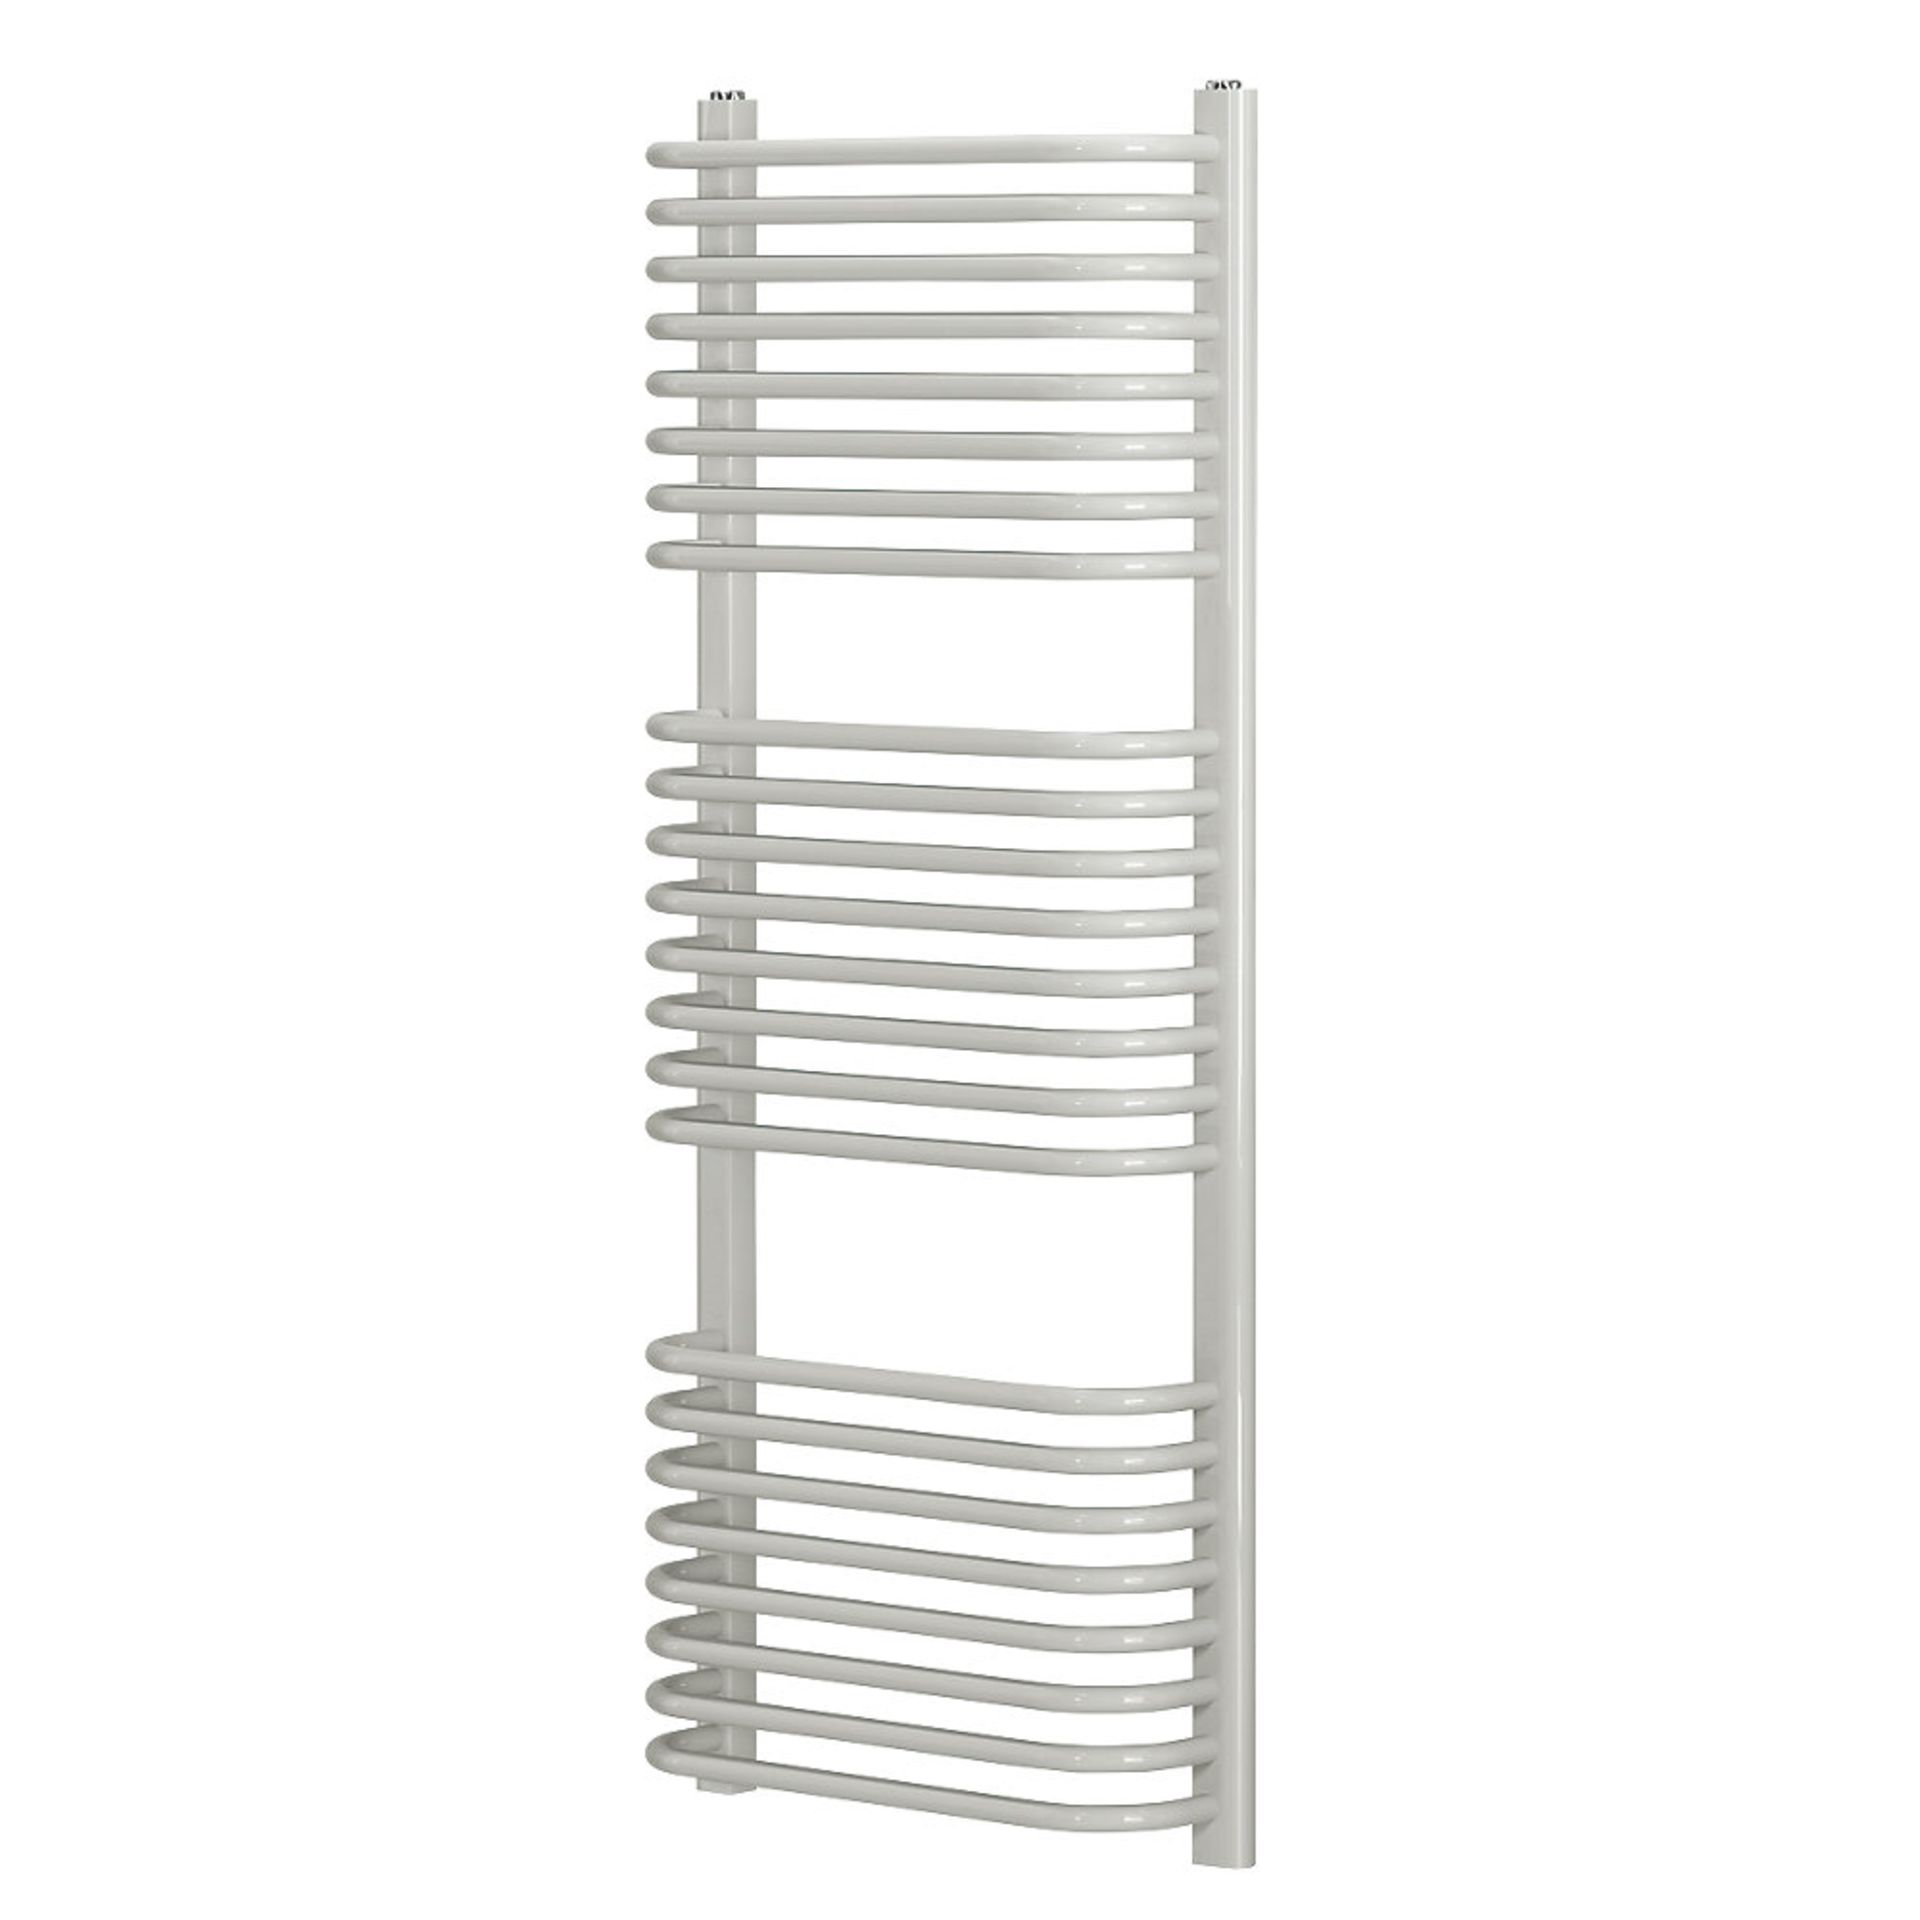 (CR6) 1200x500mm CURVED D-BAR TOWEL RADIATOR WHITE. High quality powder-coated steel constructi... - Image 2 of 2